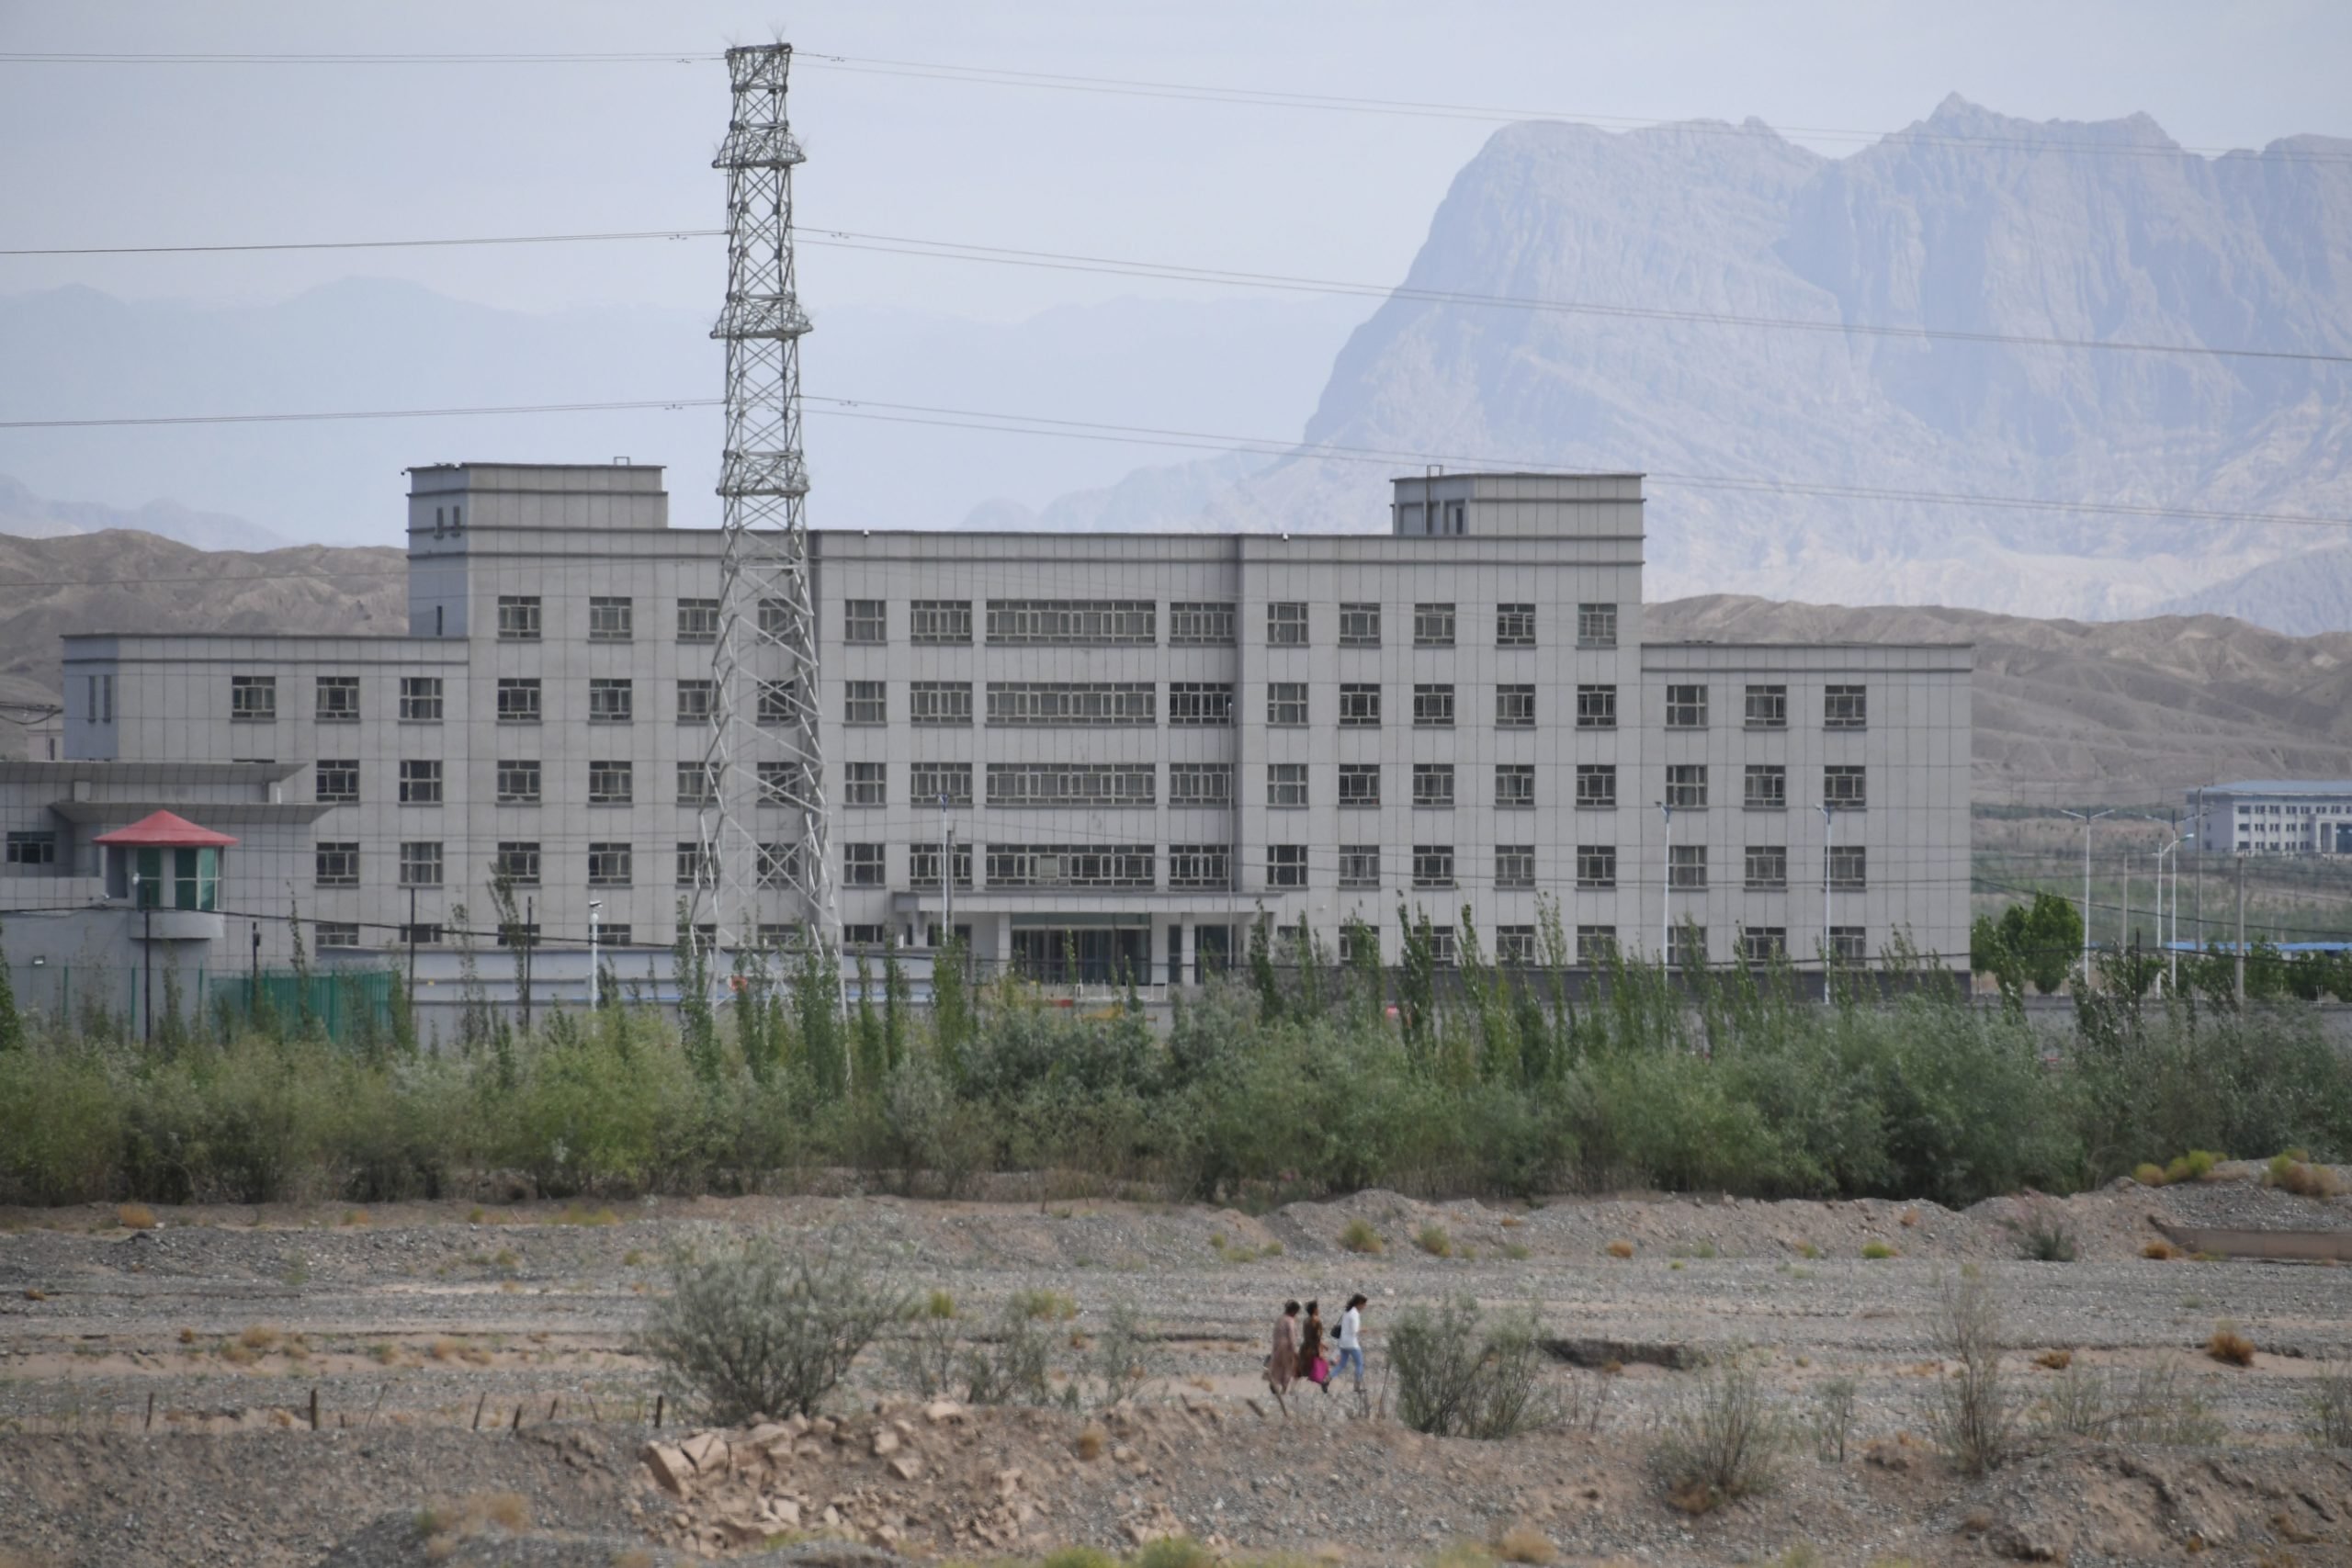 This photo taken on June 2, 2019 shows a facility believed to be a re-education camp where mostly Muslim ethnic minorities are detained, in the western Xinjiang region. (Greg Baker/AFP via Getty Images)